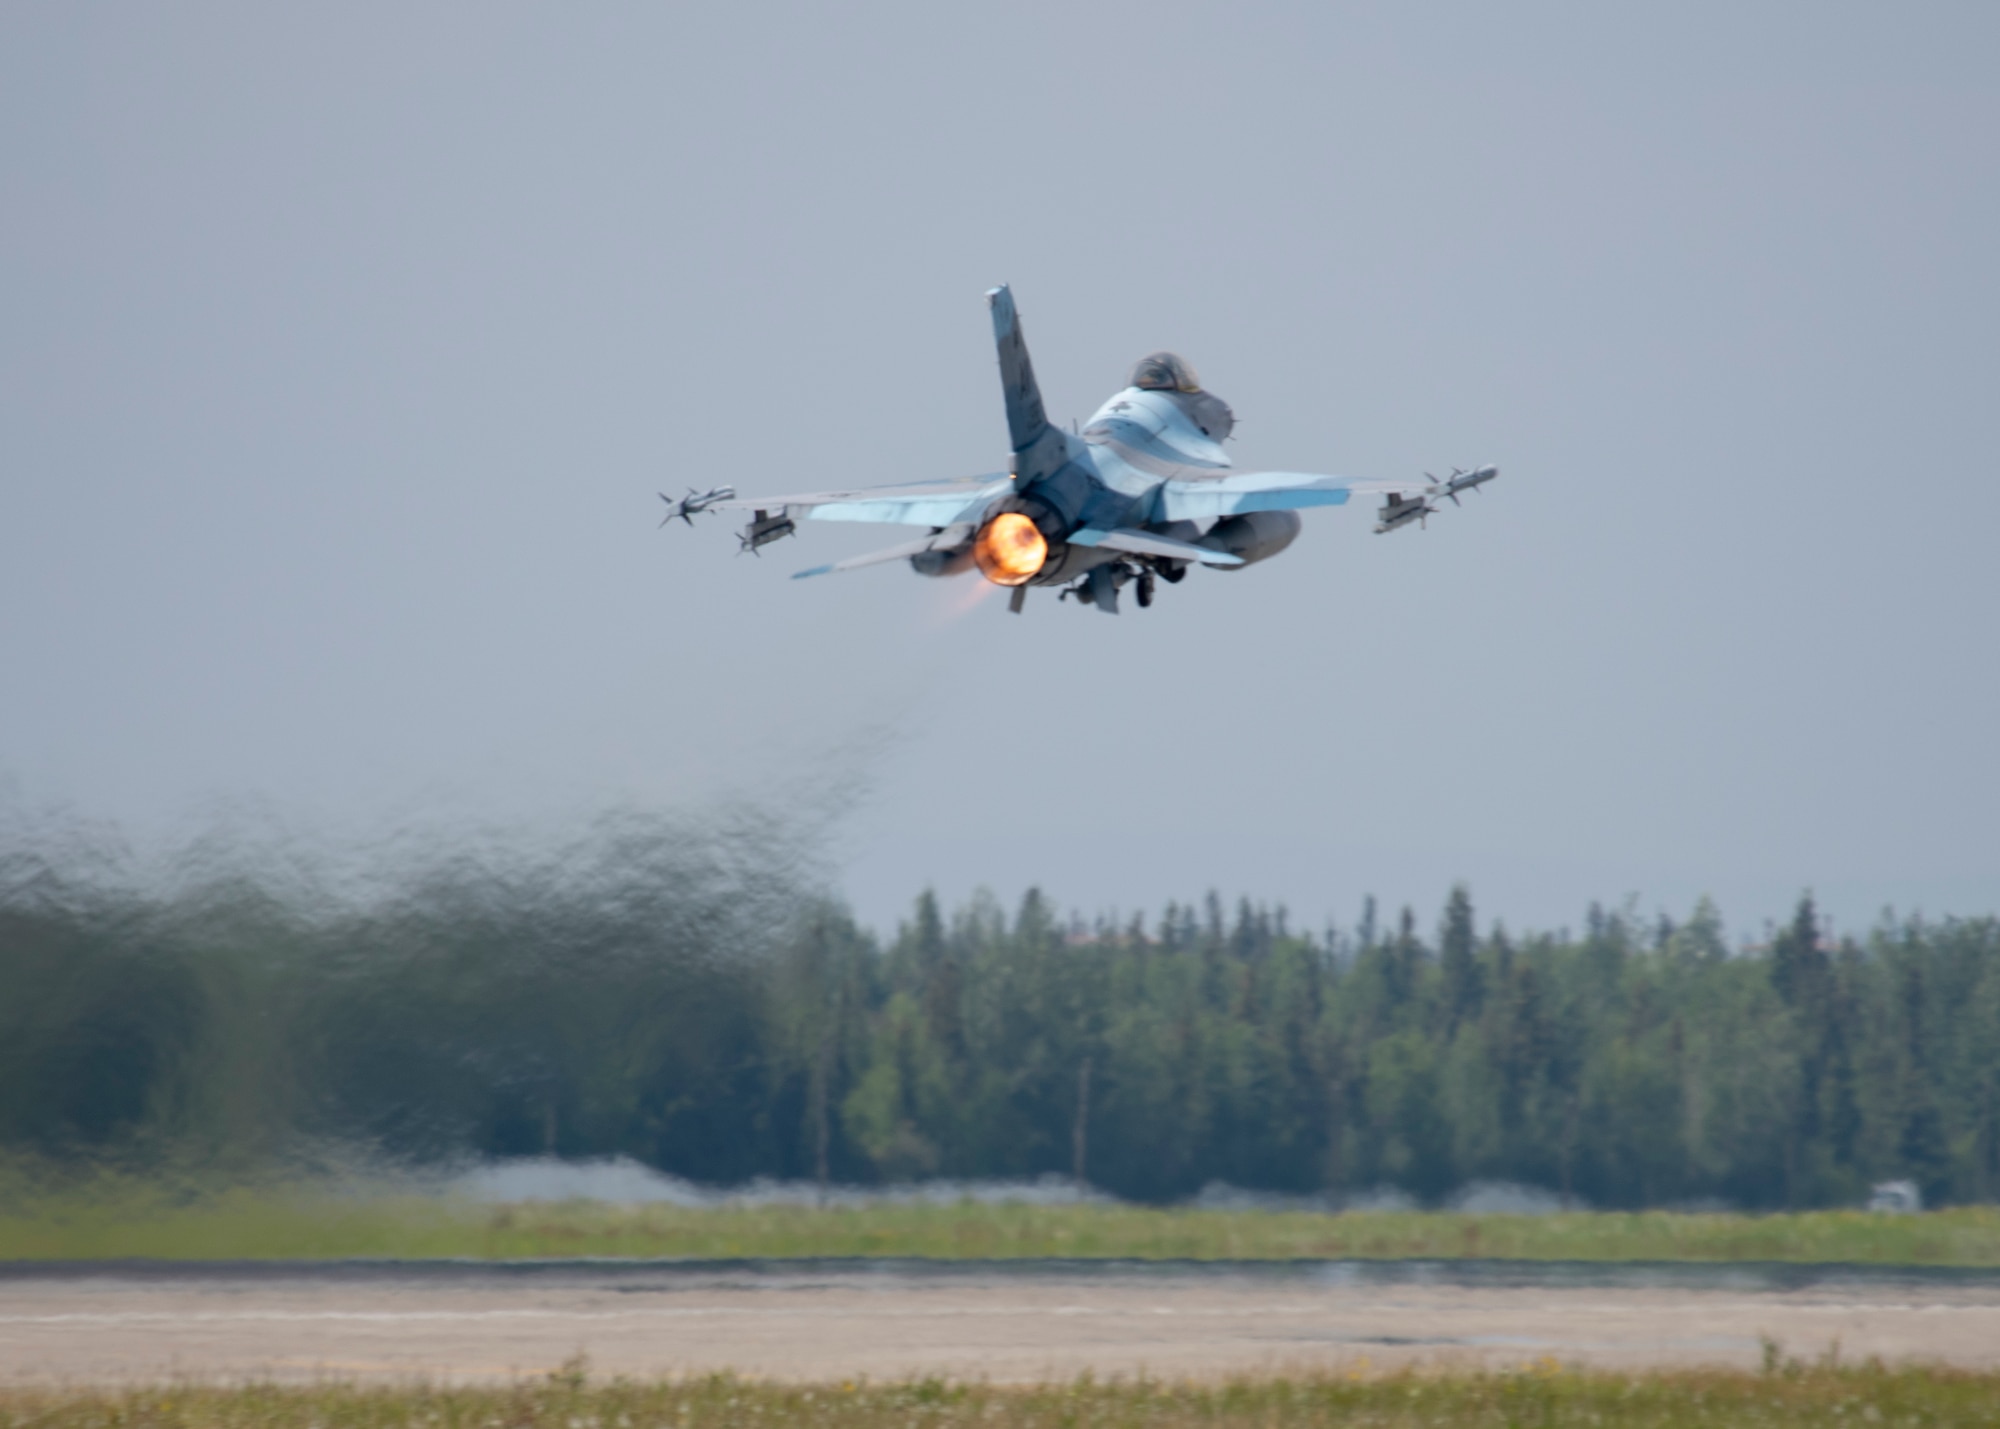 A U.S. Air Force 18th Aggressor Squadron F-16 Fighting Falcon takes-off for a training sortie as part of the Red Flag 22-2 exercise at Eielson Air Force Base, Alaska, June 16, 2022. The Aggressors are dedicated to playing the “red team” adversaries against “blue team” allies during Red Flag aerial training missions. The Red Flag Exercise was established in 1975 and serves as a two-week advanced aerial combat training exercise held multiple times a year by the USAF, alongside joint partner and allied air and ground forces. (U.S. Air Force photo by Staff Sgt. Ryan Lackey)